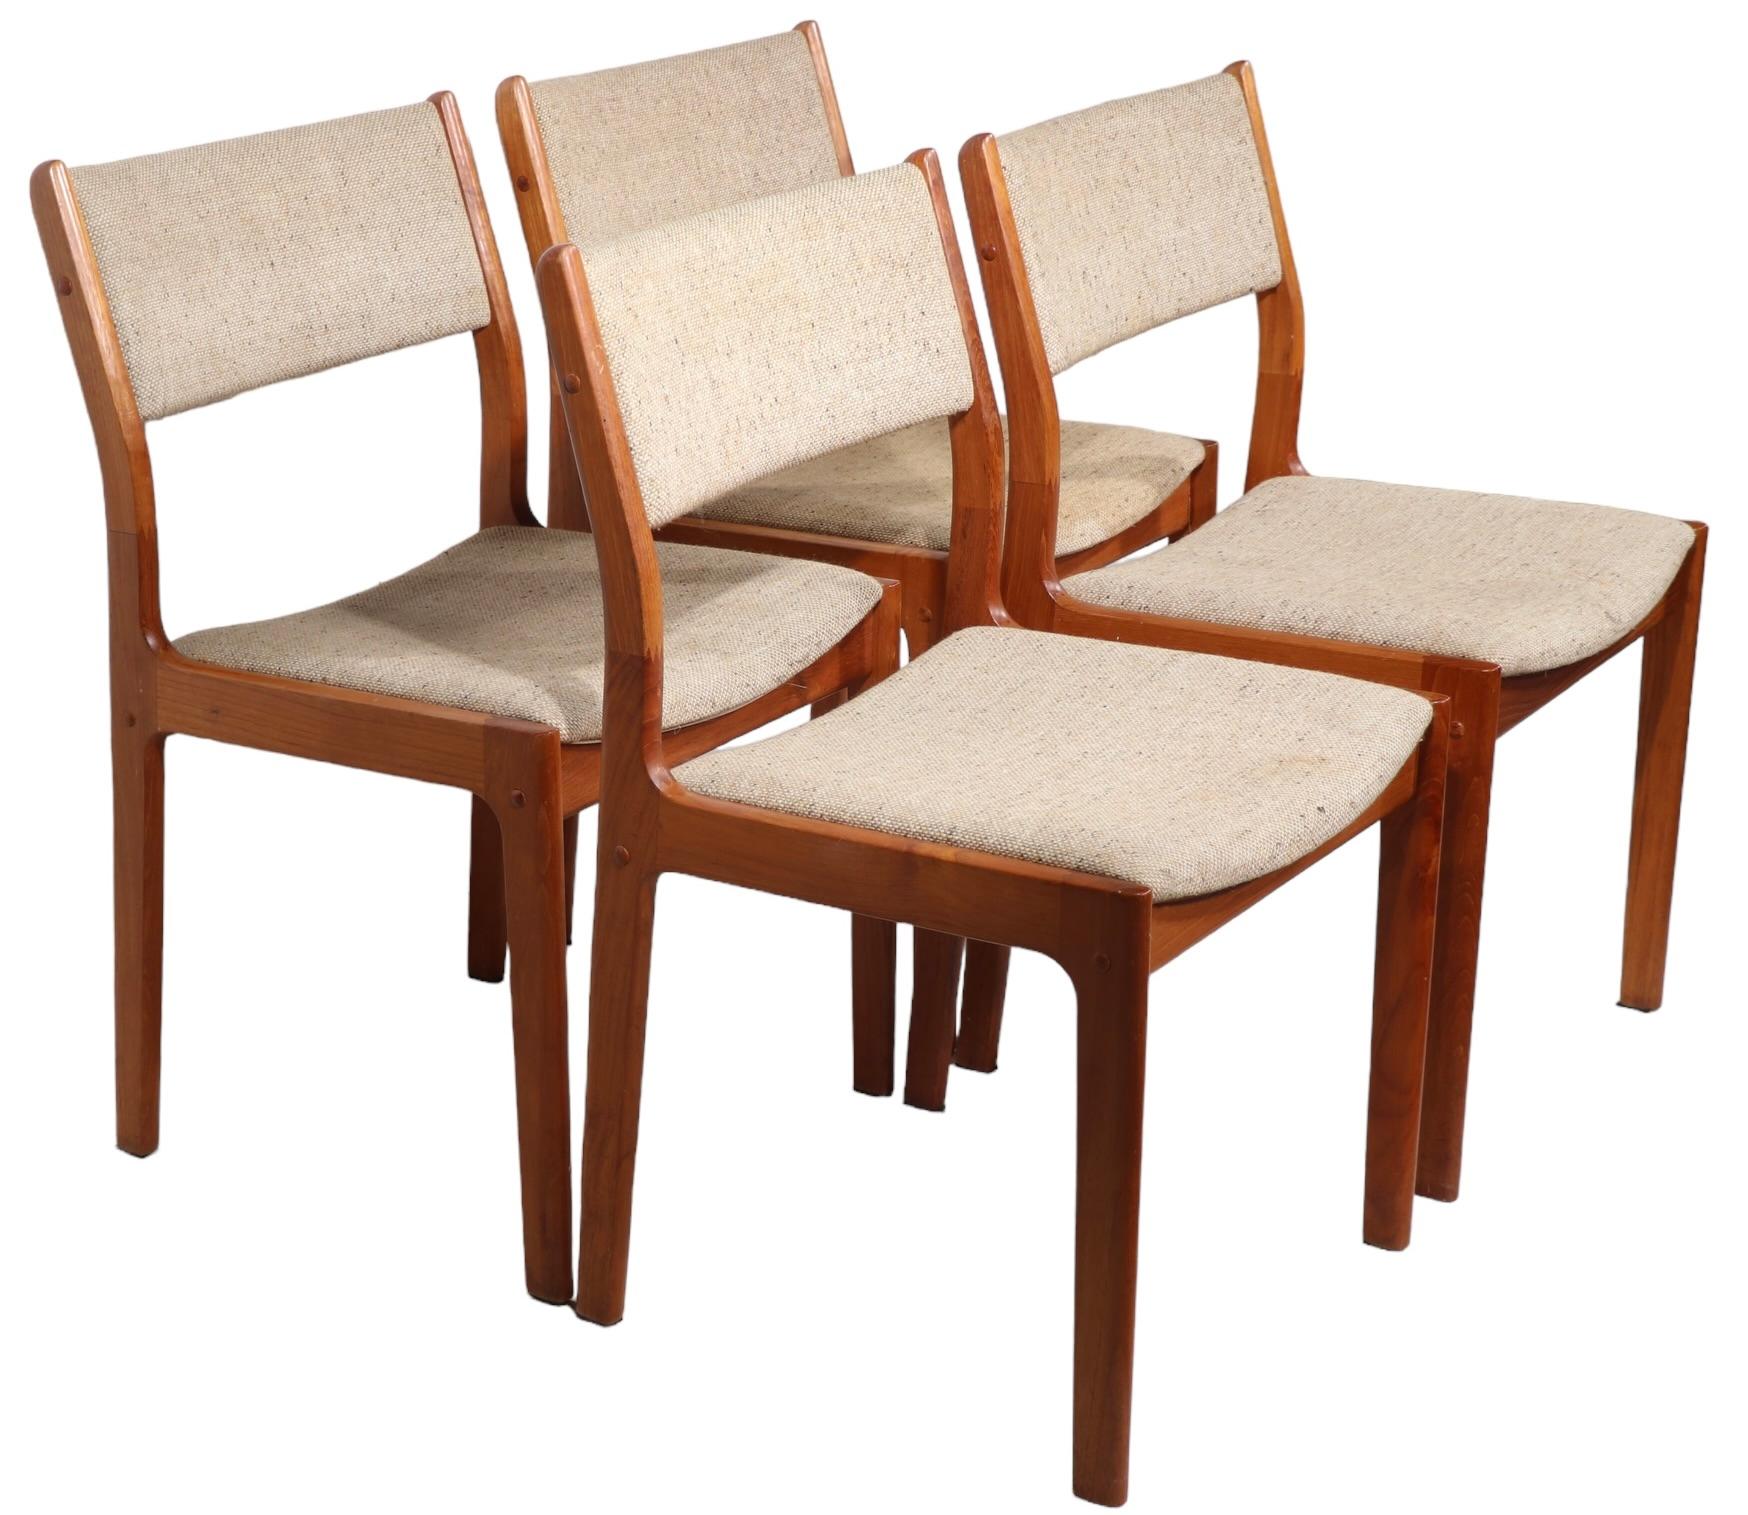 Chci architectural dining chairs, executed ninth Danis style but actually made in Singapore, circa 1950-1960's. The set consists of four side chairs, having solid teak frames, and tweed upholstery seats and back rests. All are structurally sound and